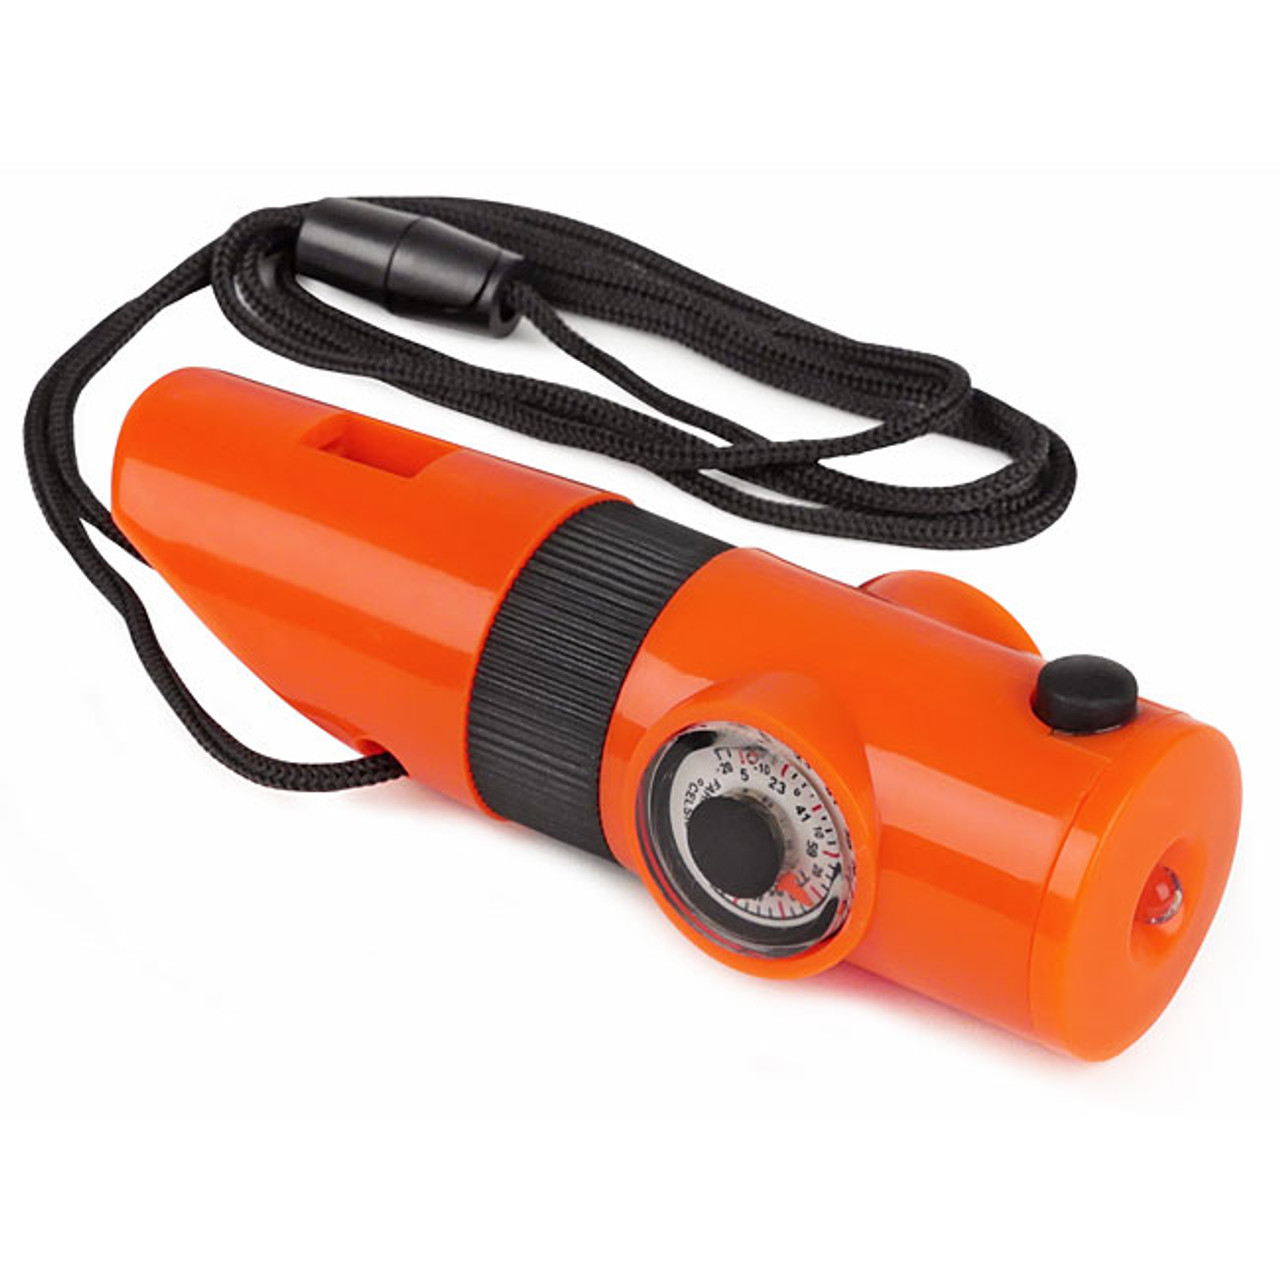 https://cdn11.bigcommerce.com/s-tumf4kk1l4/images/stencil/1280x1280/products/3188/5863/orange-7-in-1-survival-whistle-with-led-flashlight-and-compass-14__99252.1640715107.jpg?c=1?imbypass=on